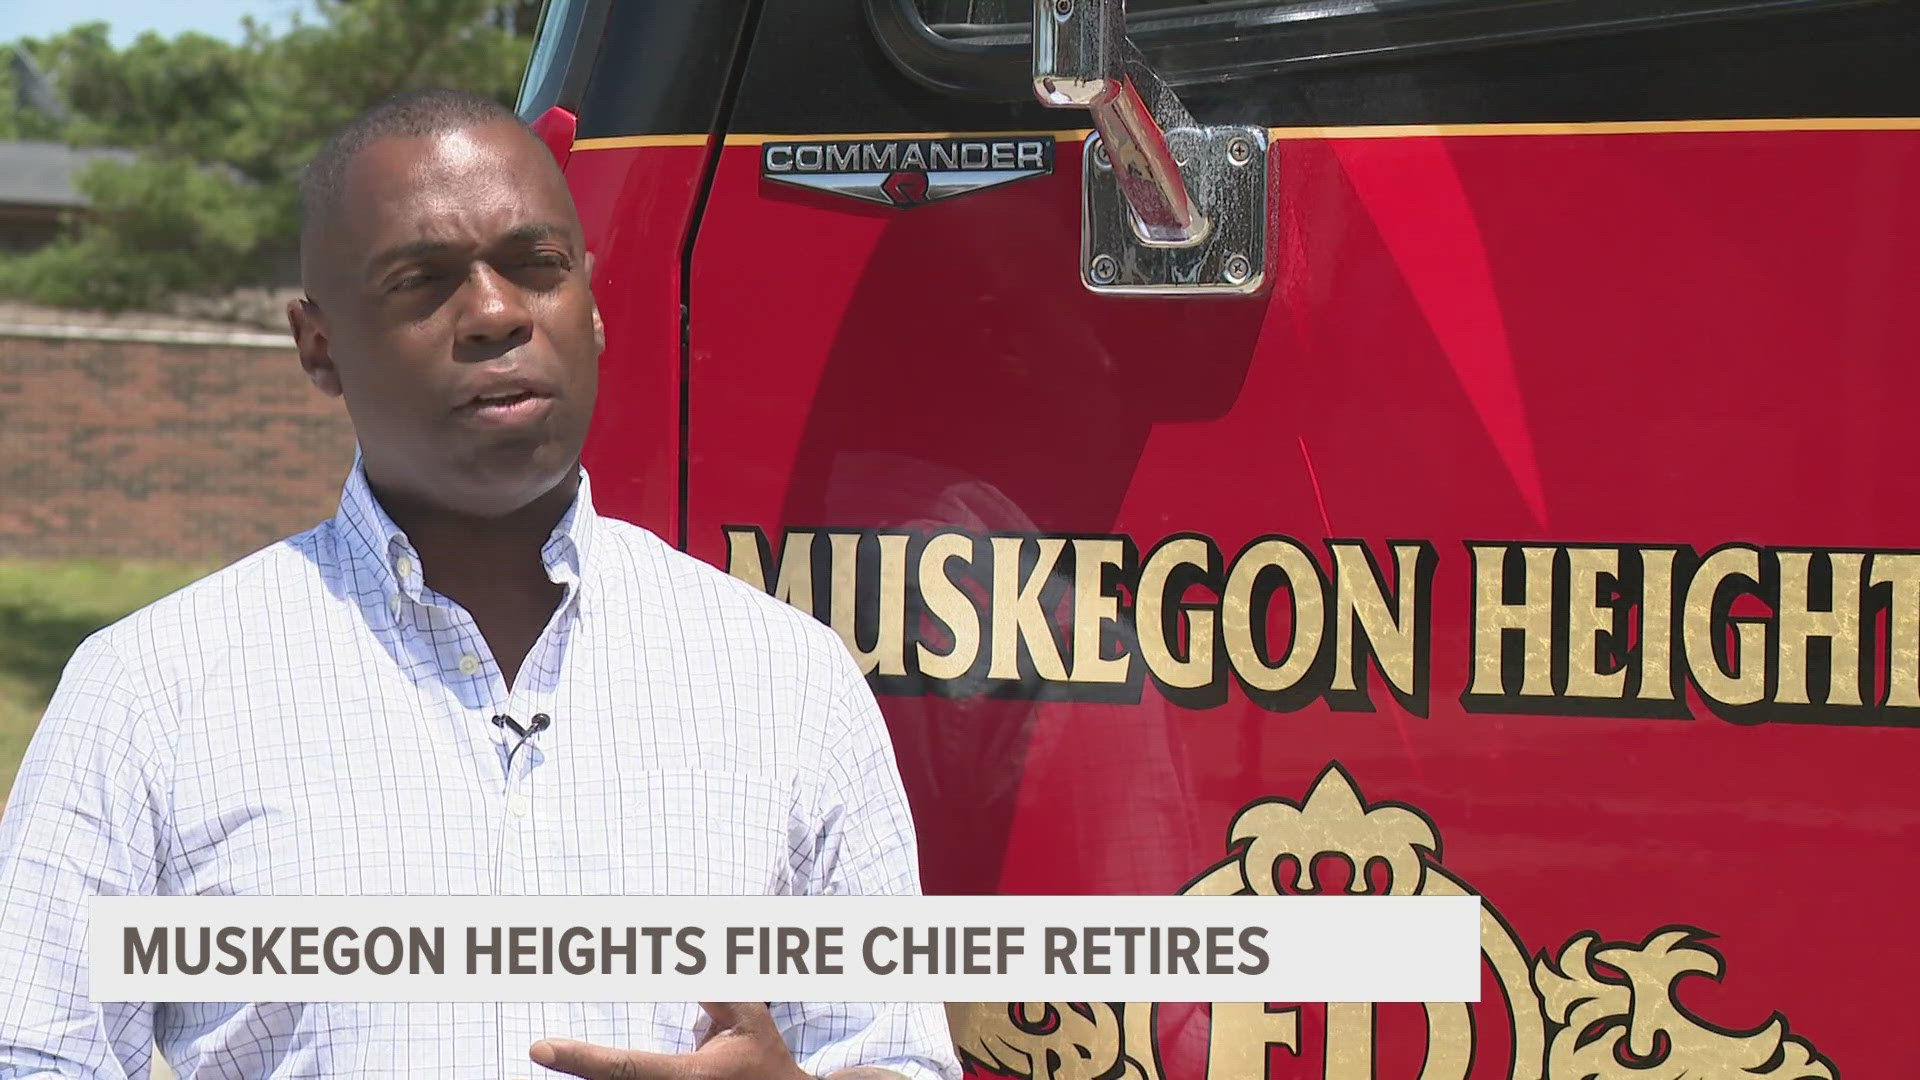 Muskegon Heights Fire Chief Chris Dean has served as chief for well over a decade.